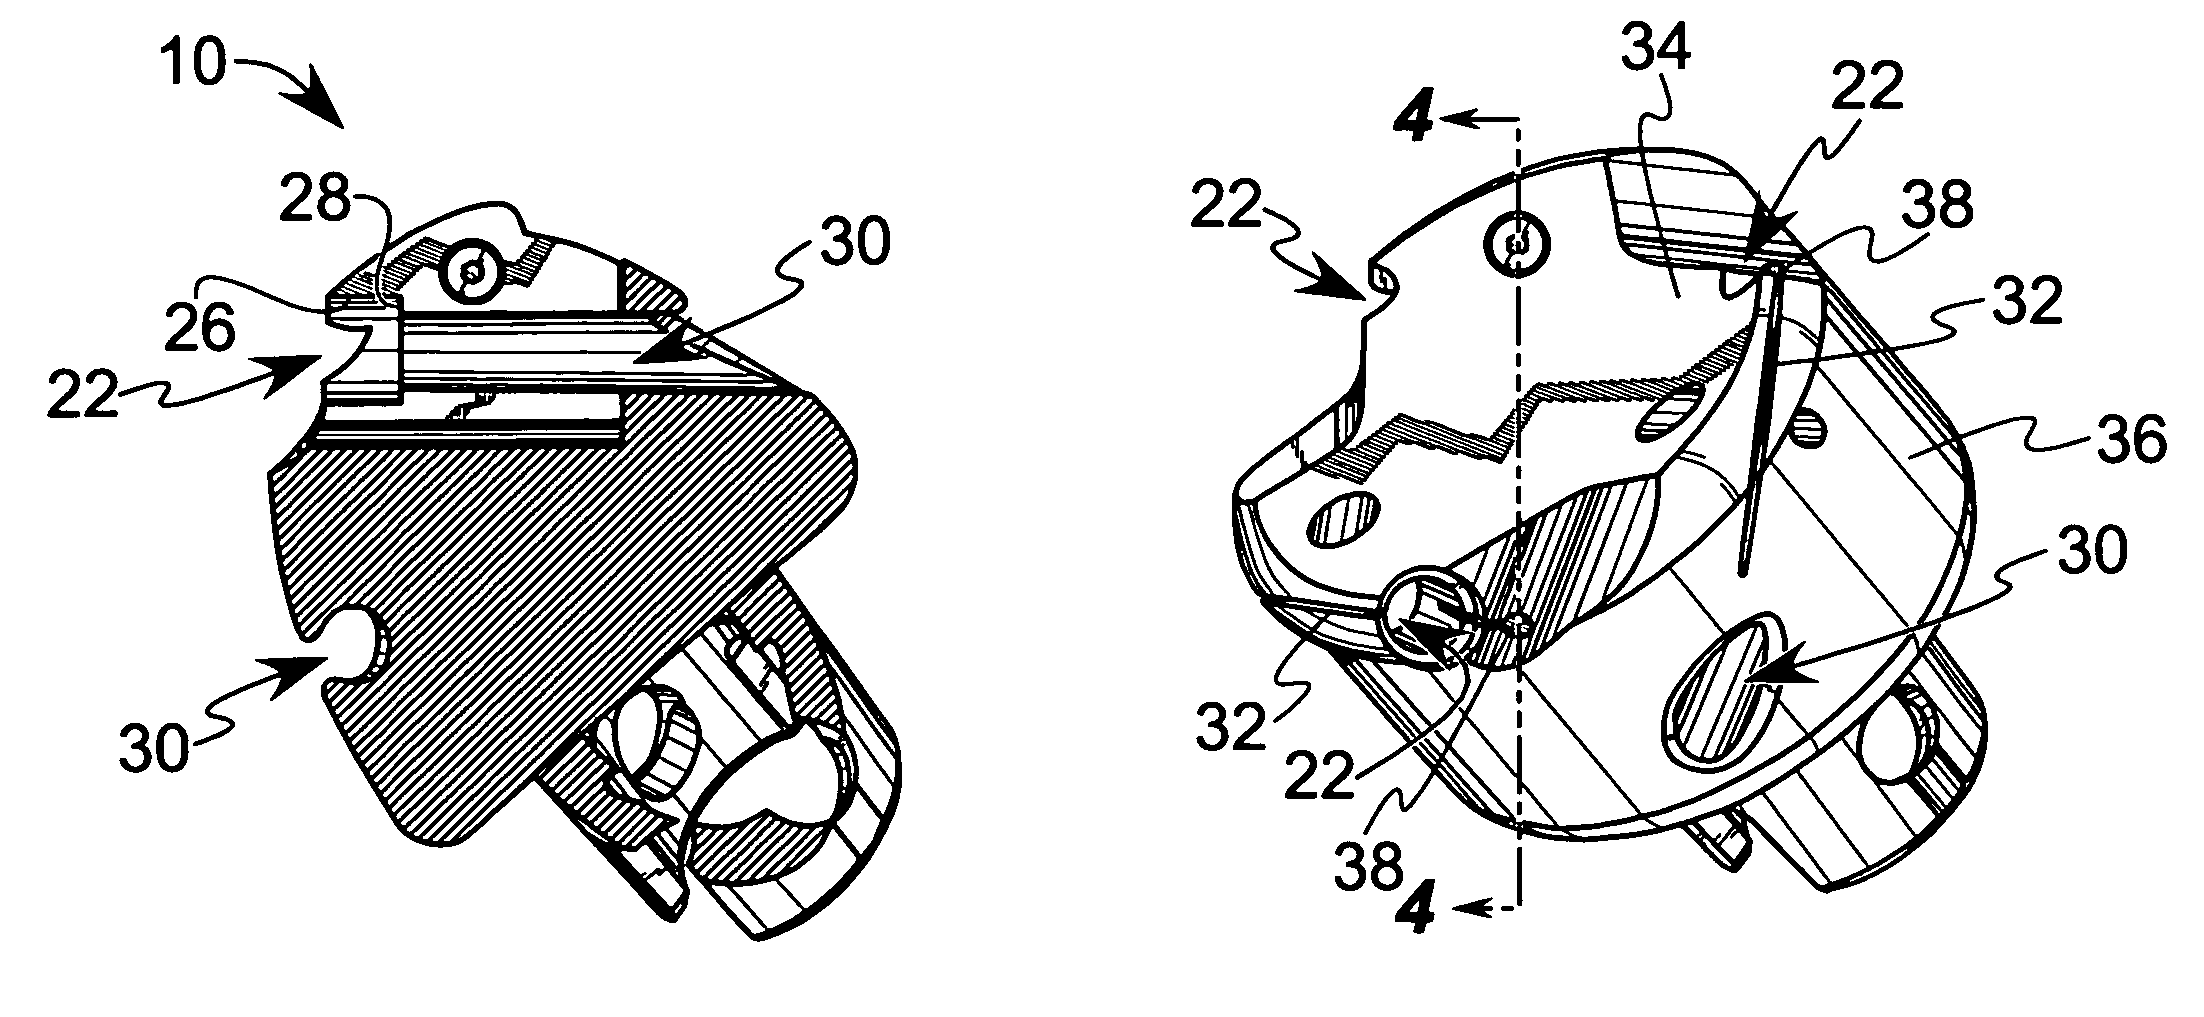 Tool body and cutting insert for metal cutting operations